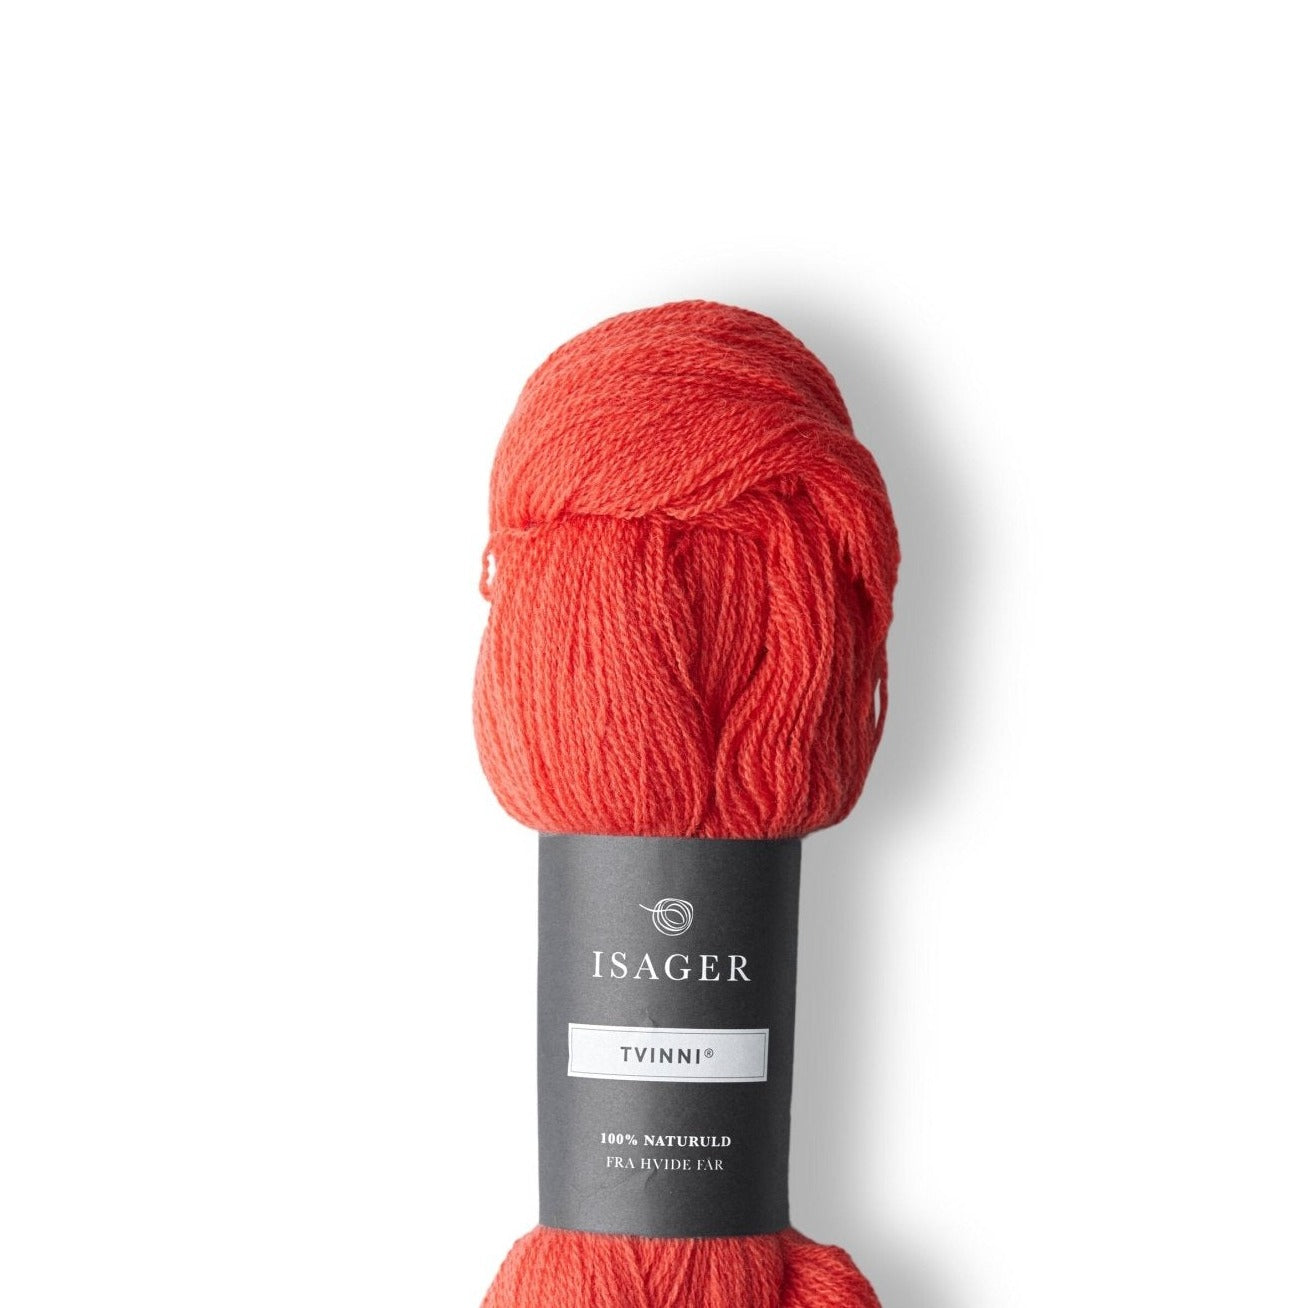 Isager Tvinni - 28 - 4 Ply - Isager - The Little Yarn Store